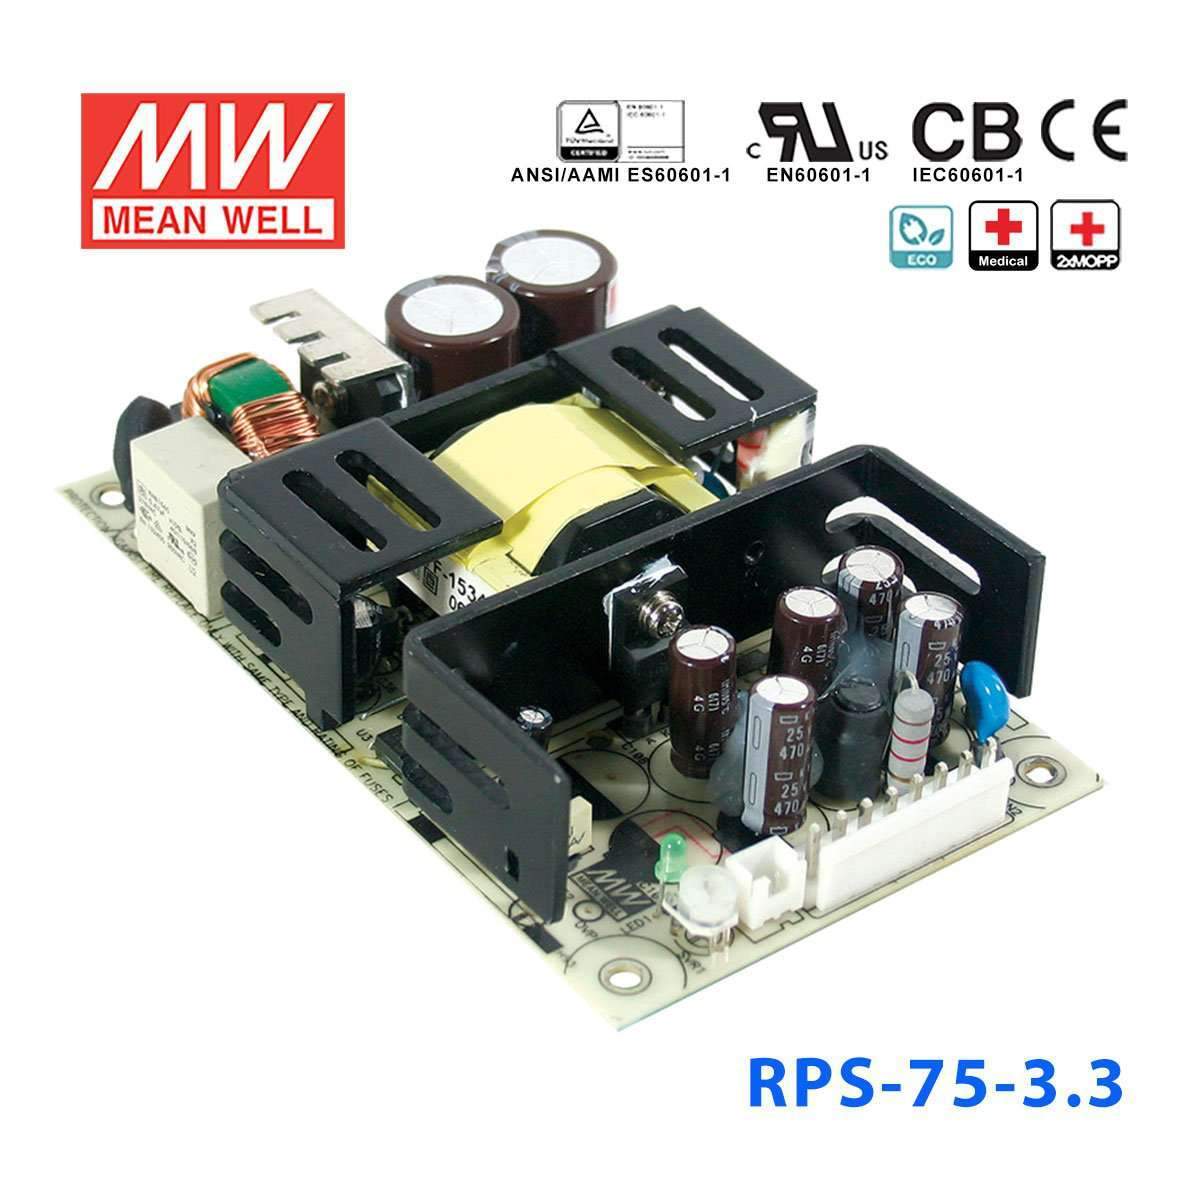 Mean Well RPS-75-3.3 Green Power Supply W 3.3V 15A - Medical Power Supply